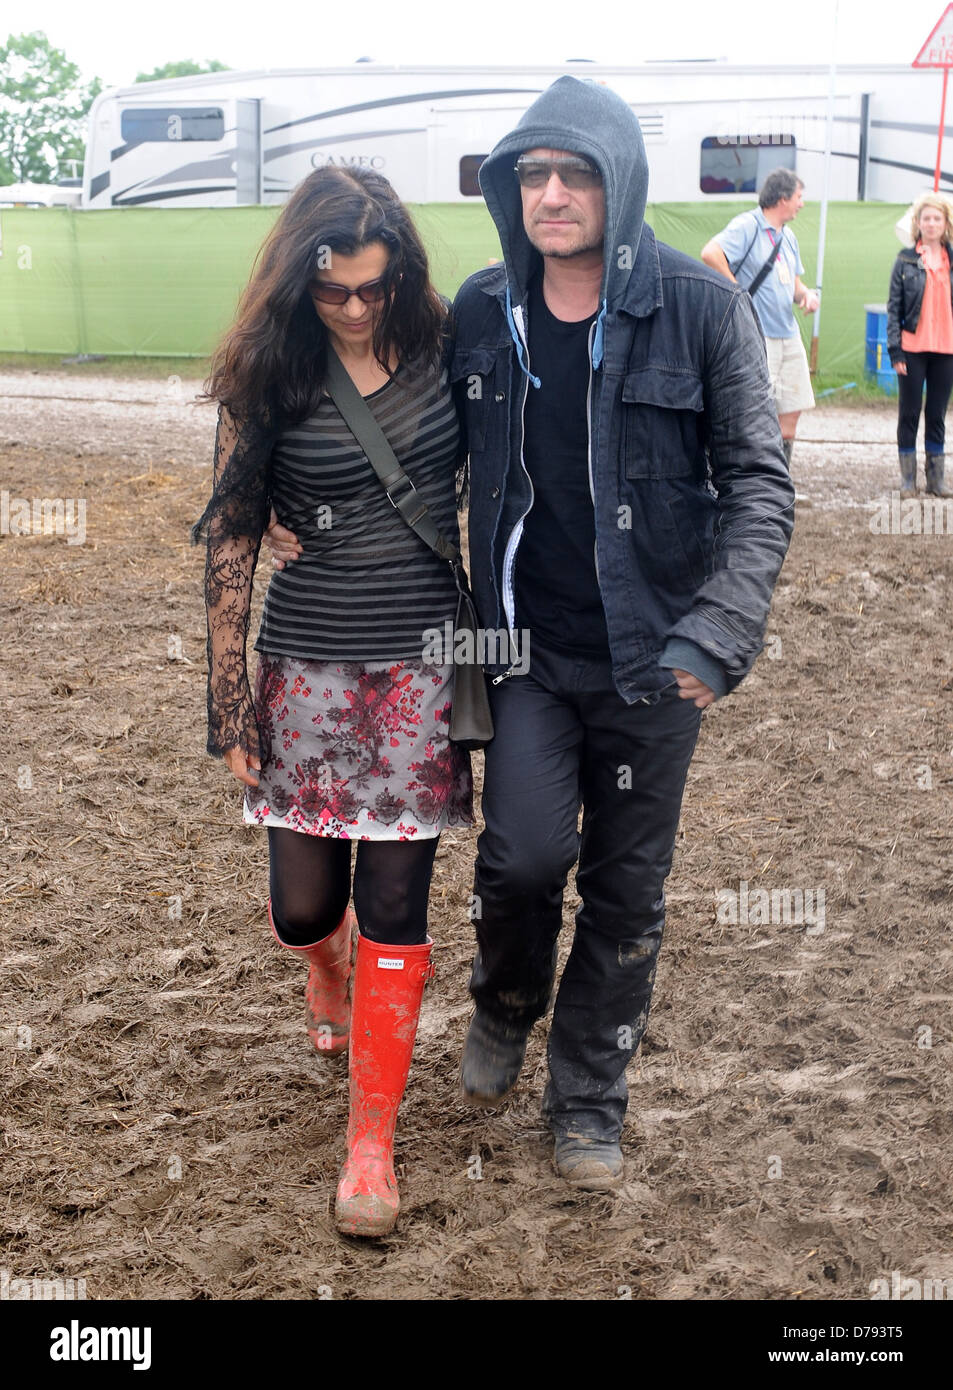 Bono and his wife Ali Hewson at The 2011 Glastonbury Music Festival held at Worthy Farm in Pilton - Day 2 Somerset, England - Stock Photo